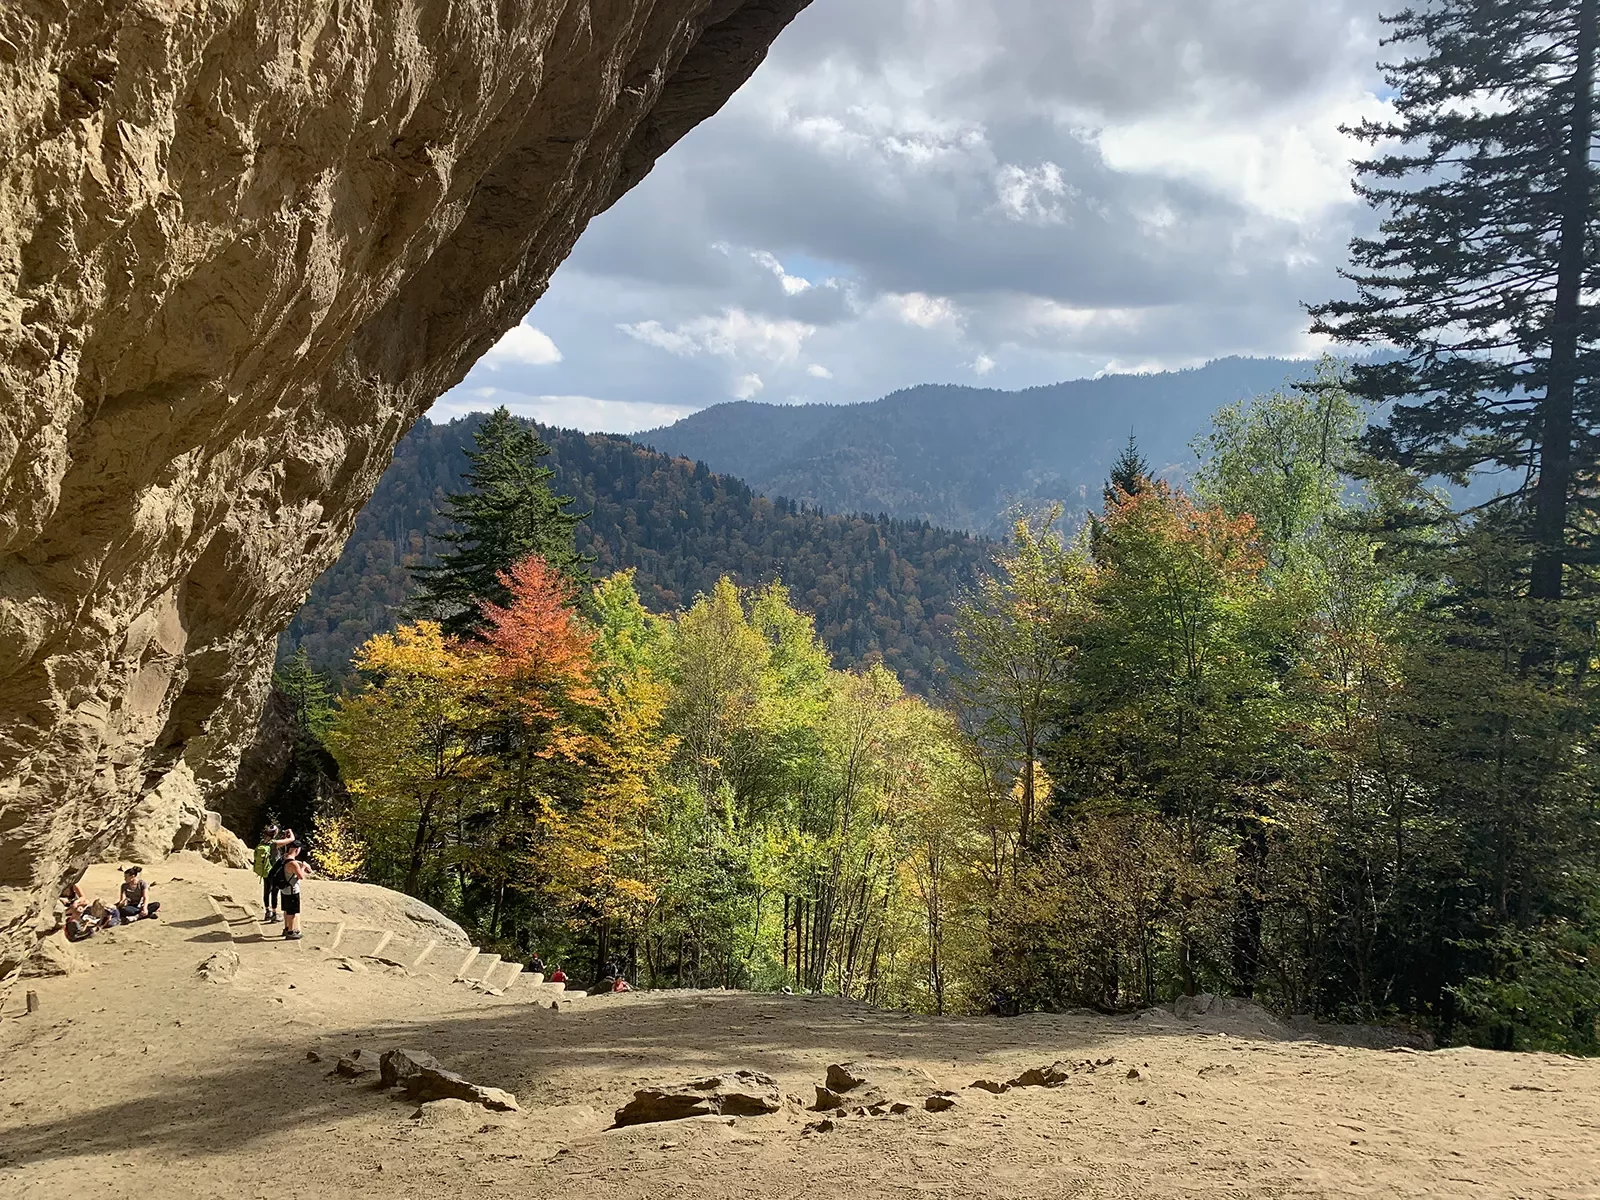 Guest walking under large cliff-face. Forest in background.